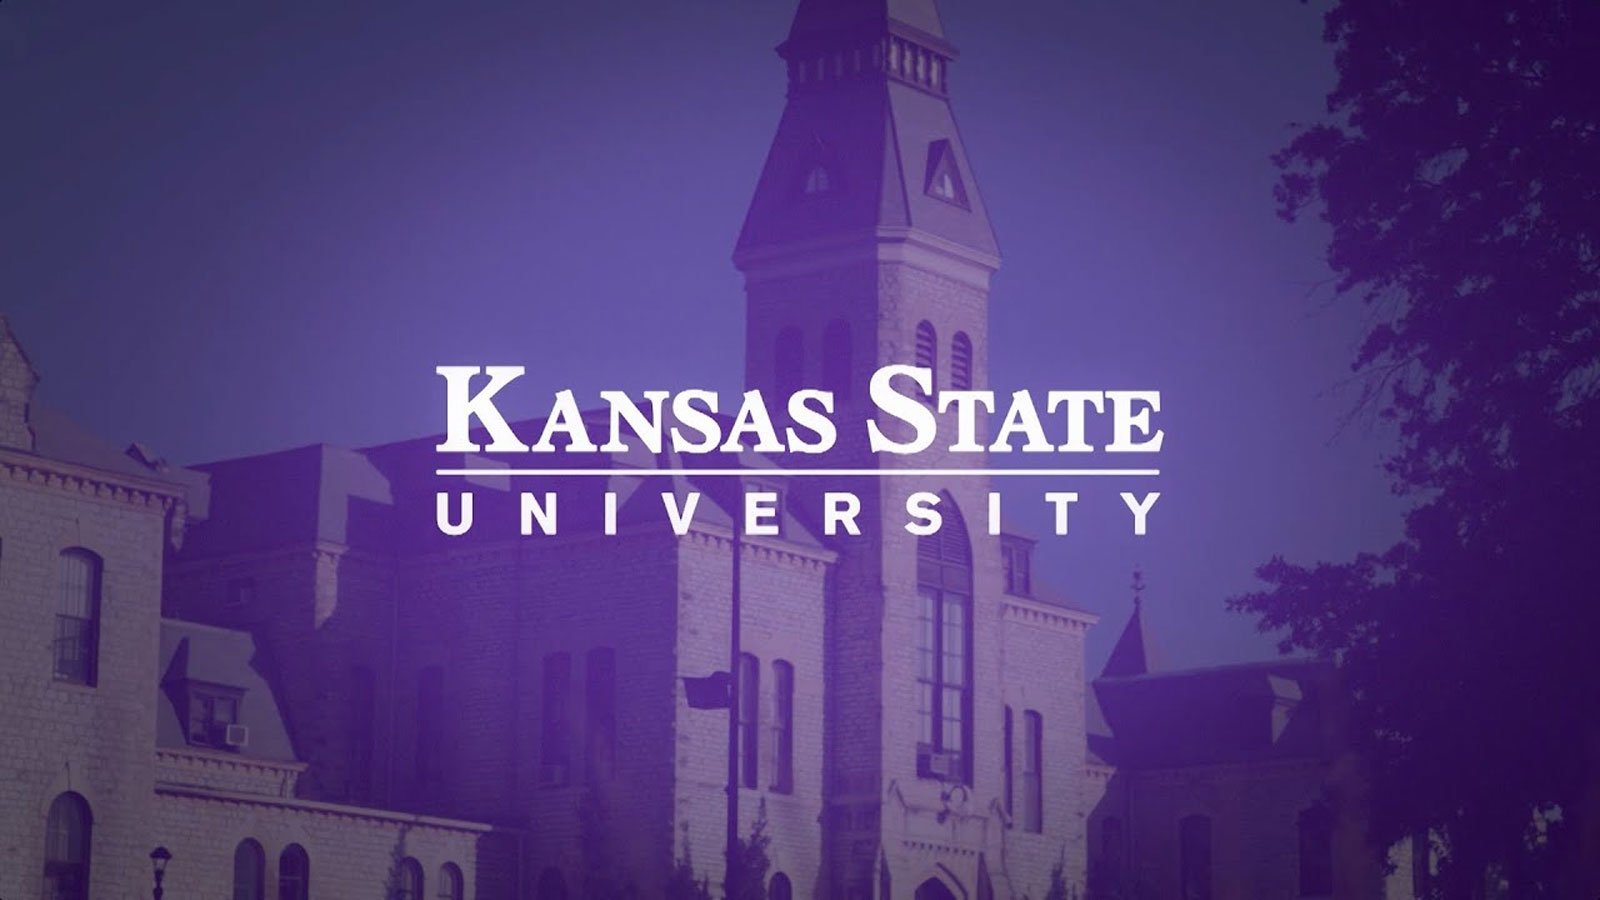 Kansas State University cyberattack disrupts IT network and services